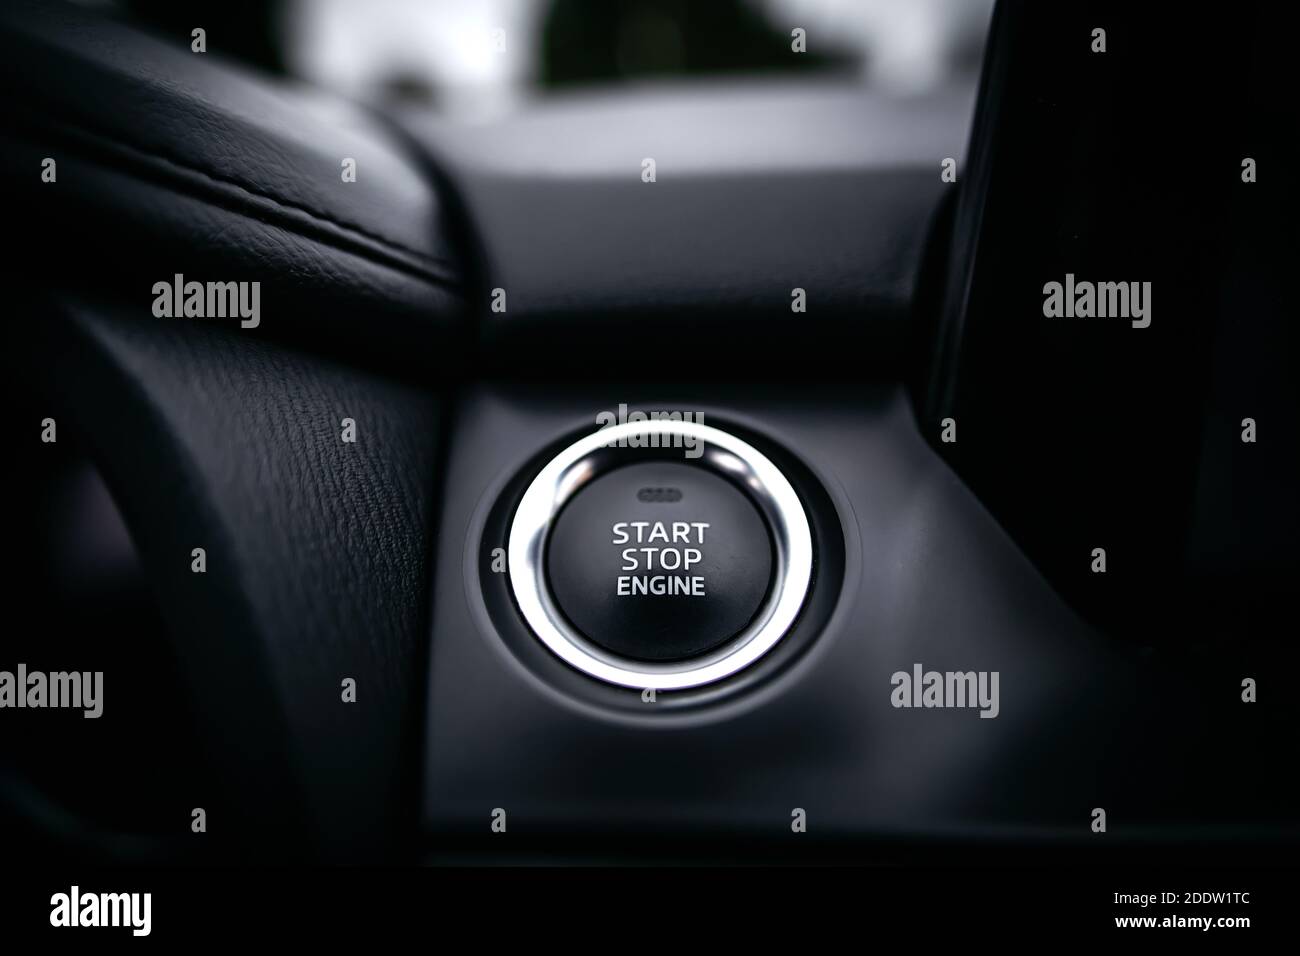 Close up Engine start stop button from a modern sport car black luxury interior Stock Photo